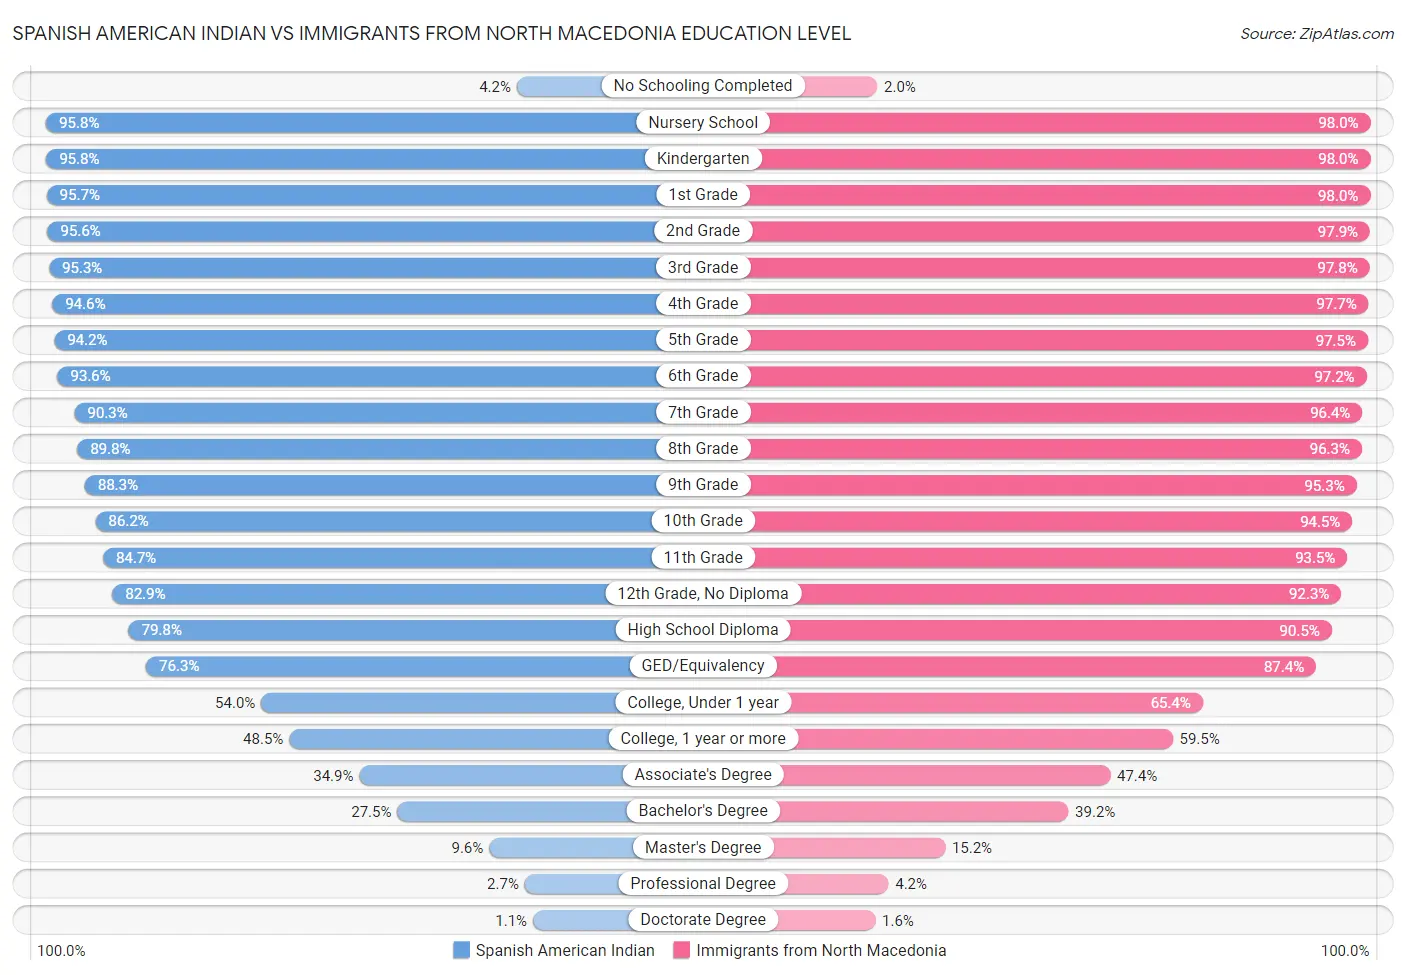 Spanish American Indian vs Immigrants from North Macedonia Education Level